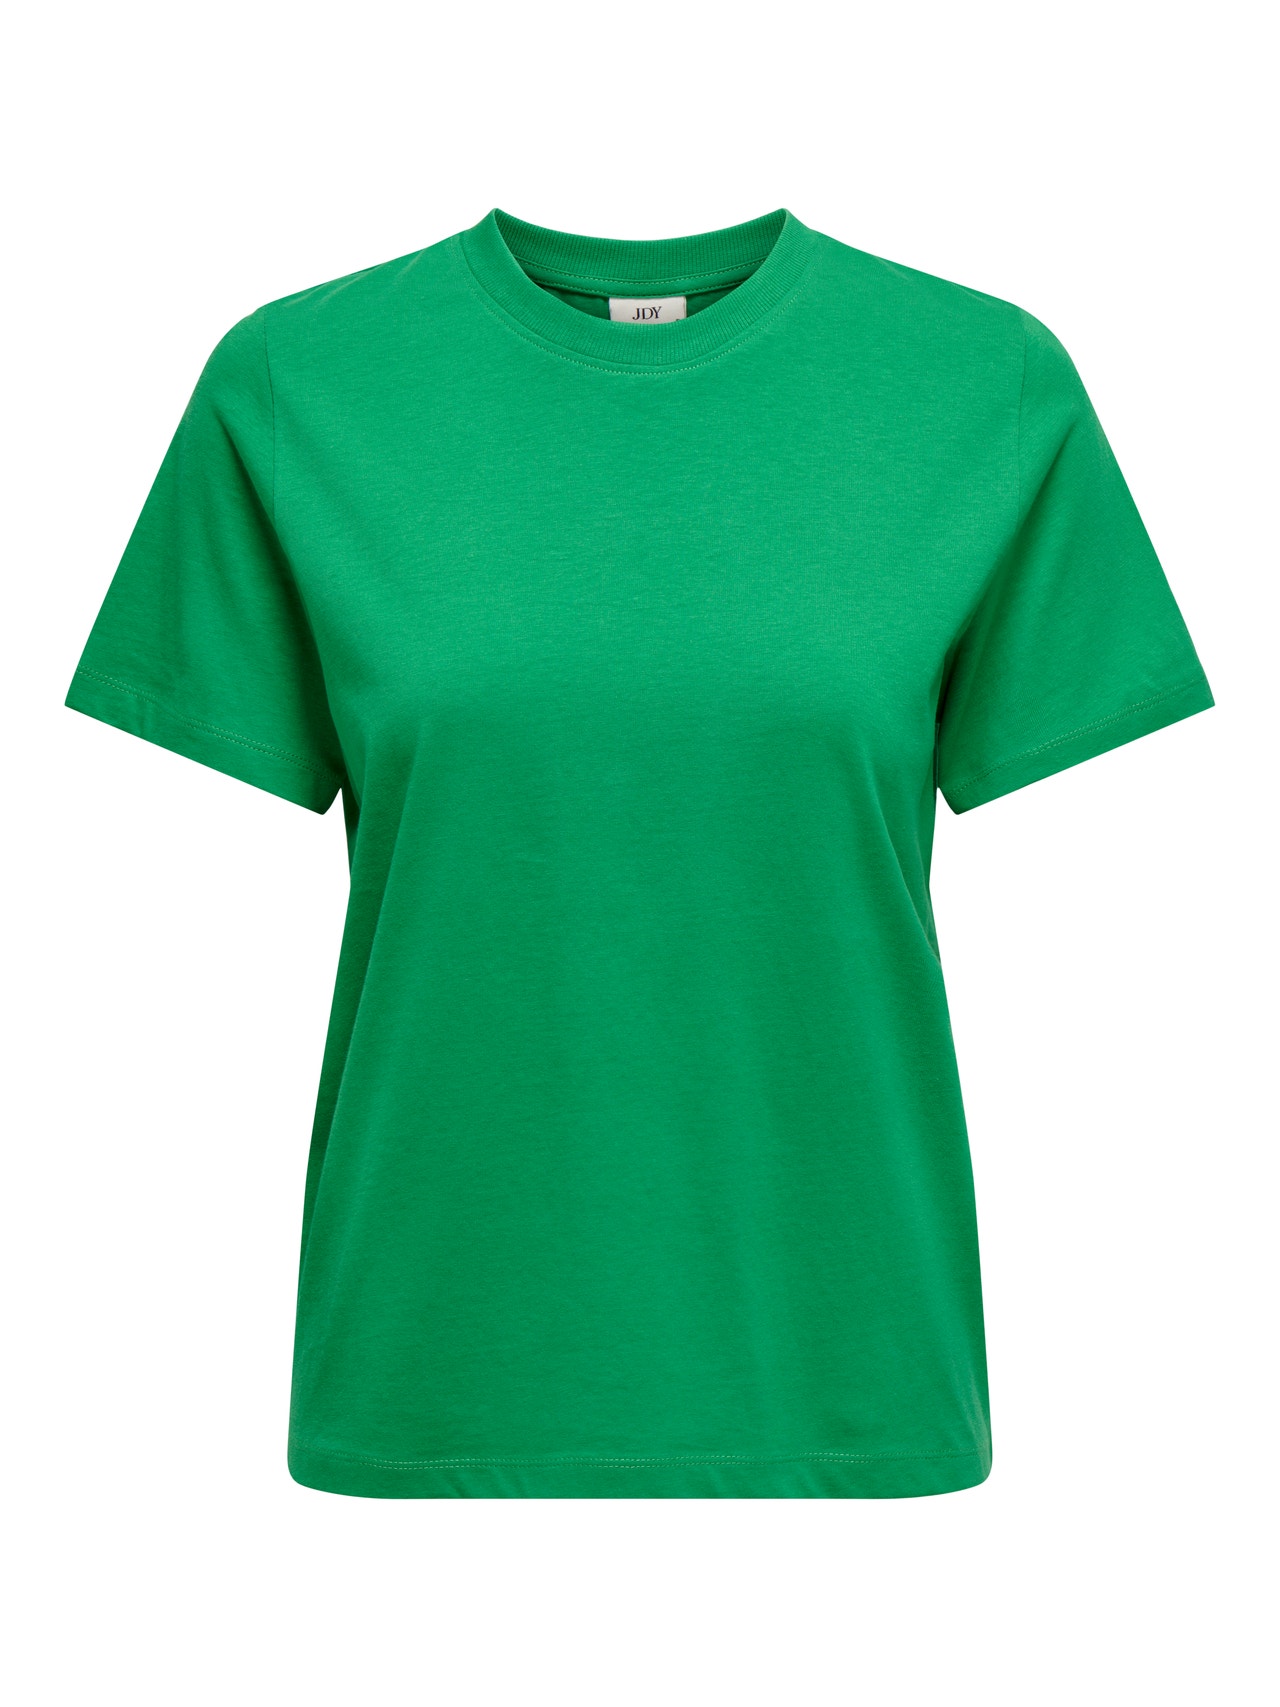 ONLY Regular Fit Round Neck T-Shirt -Jelly Bean - 15292431